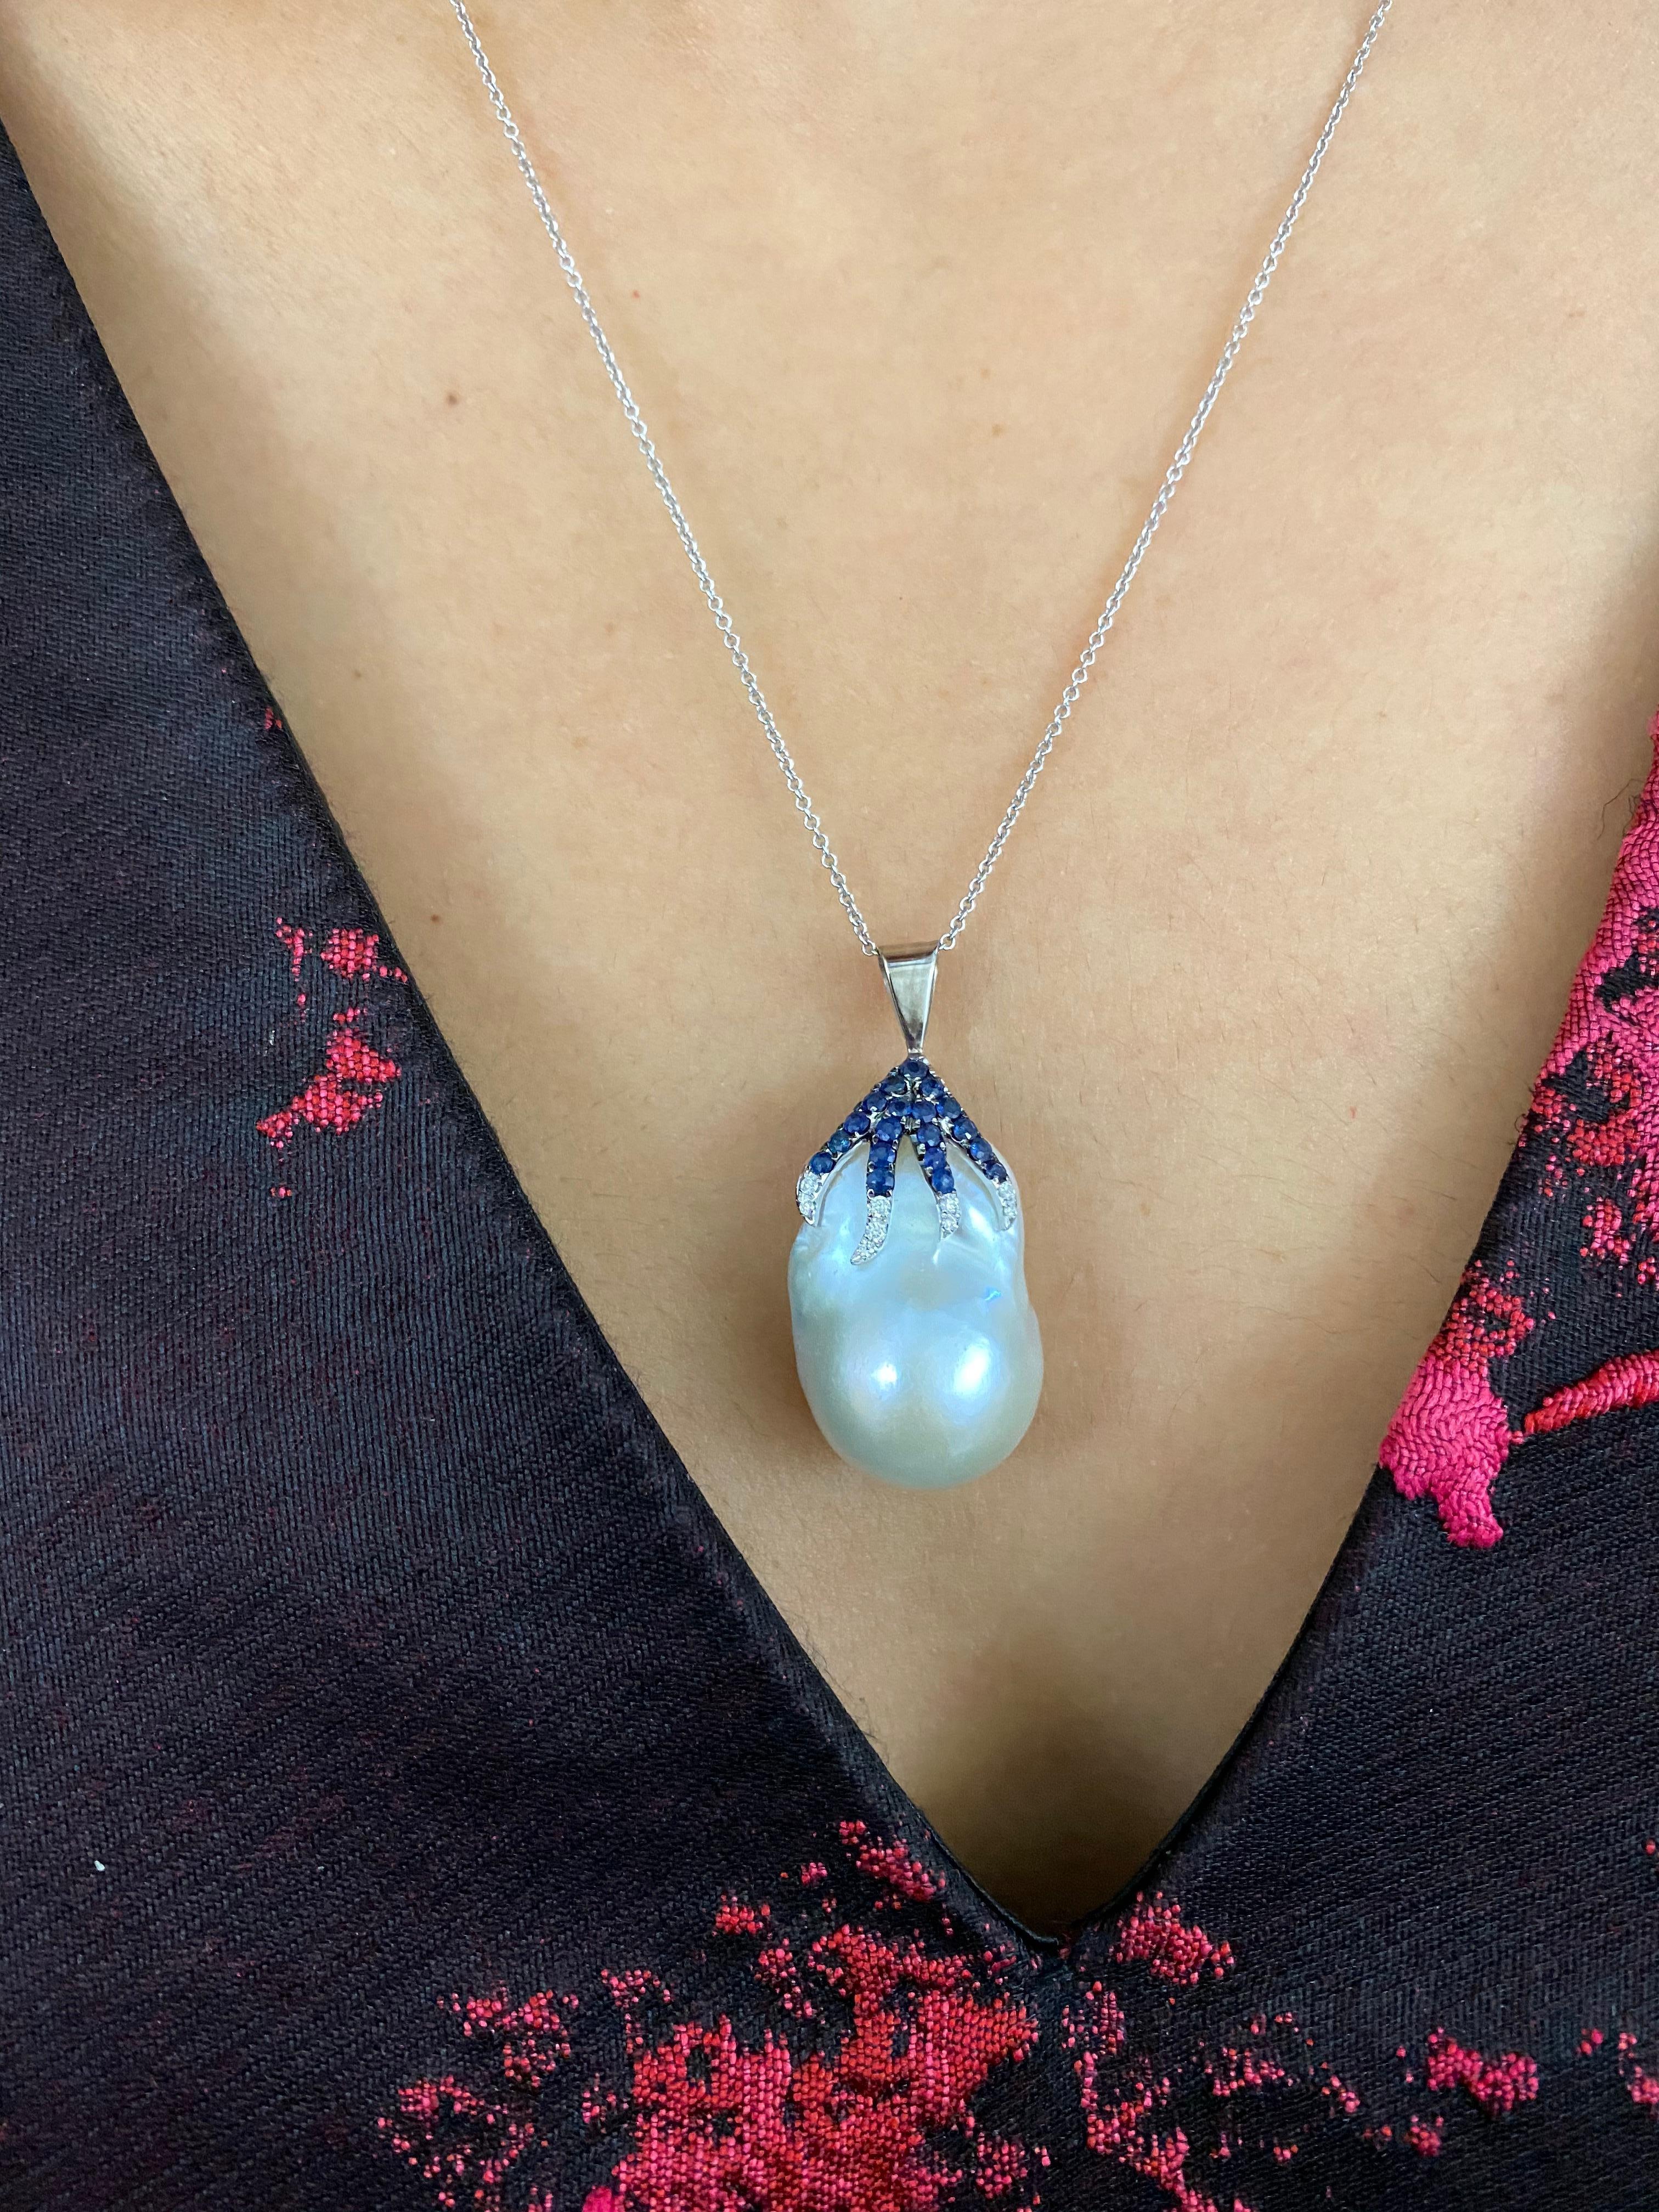 Women's 6.58 Carat Pearl, Blue Sapphire, and White Diamond Pendant Necklace 18K Gold For Sale